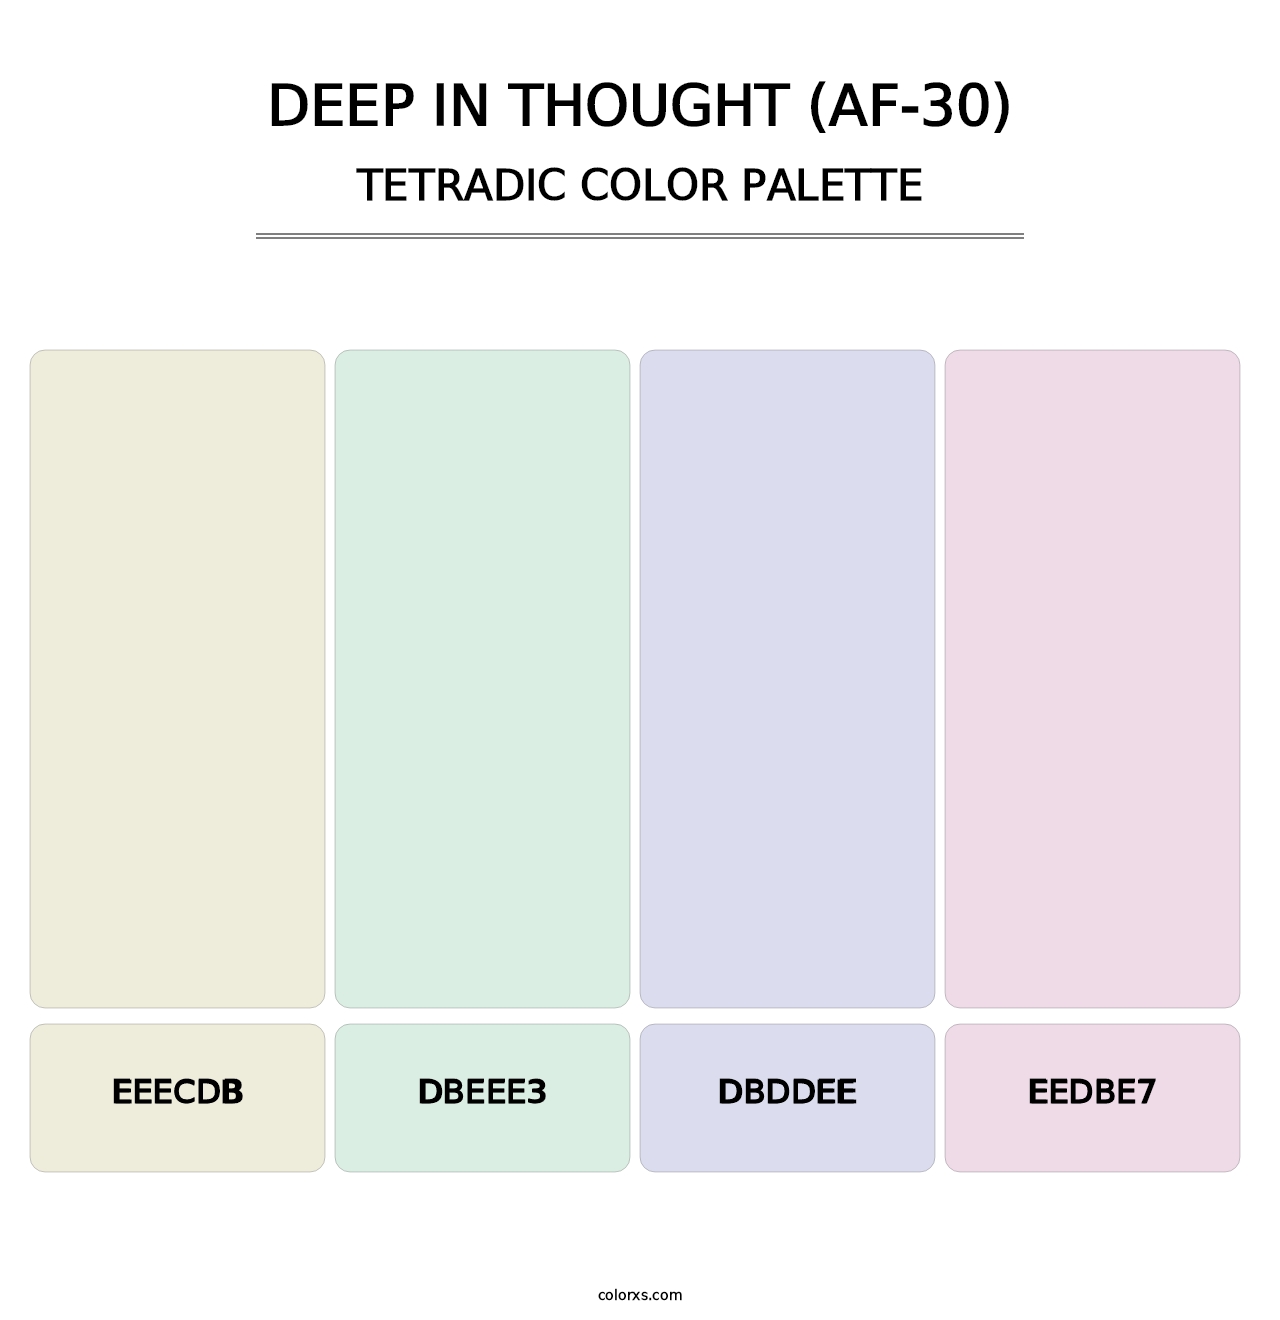 Deep in Thought (AF-30) - Tetradic Color Palette